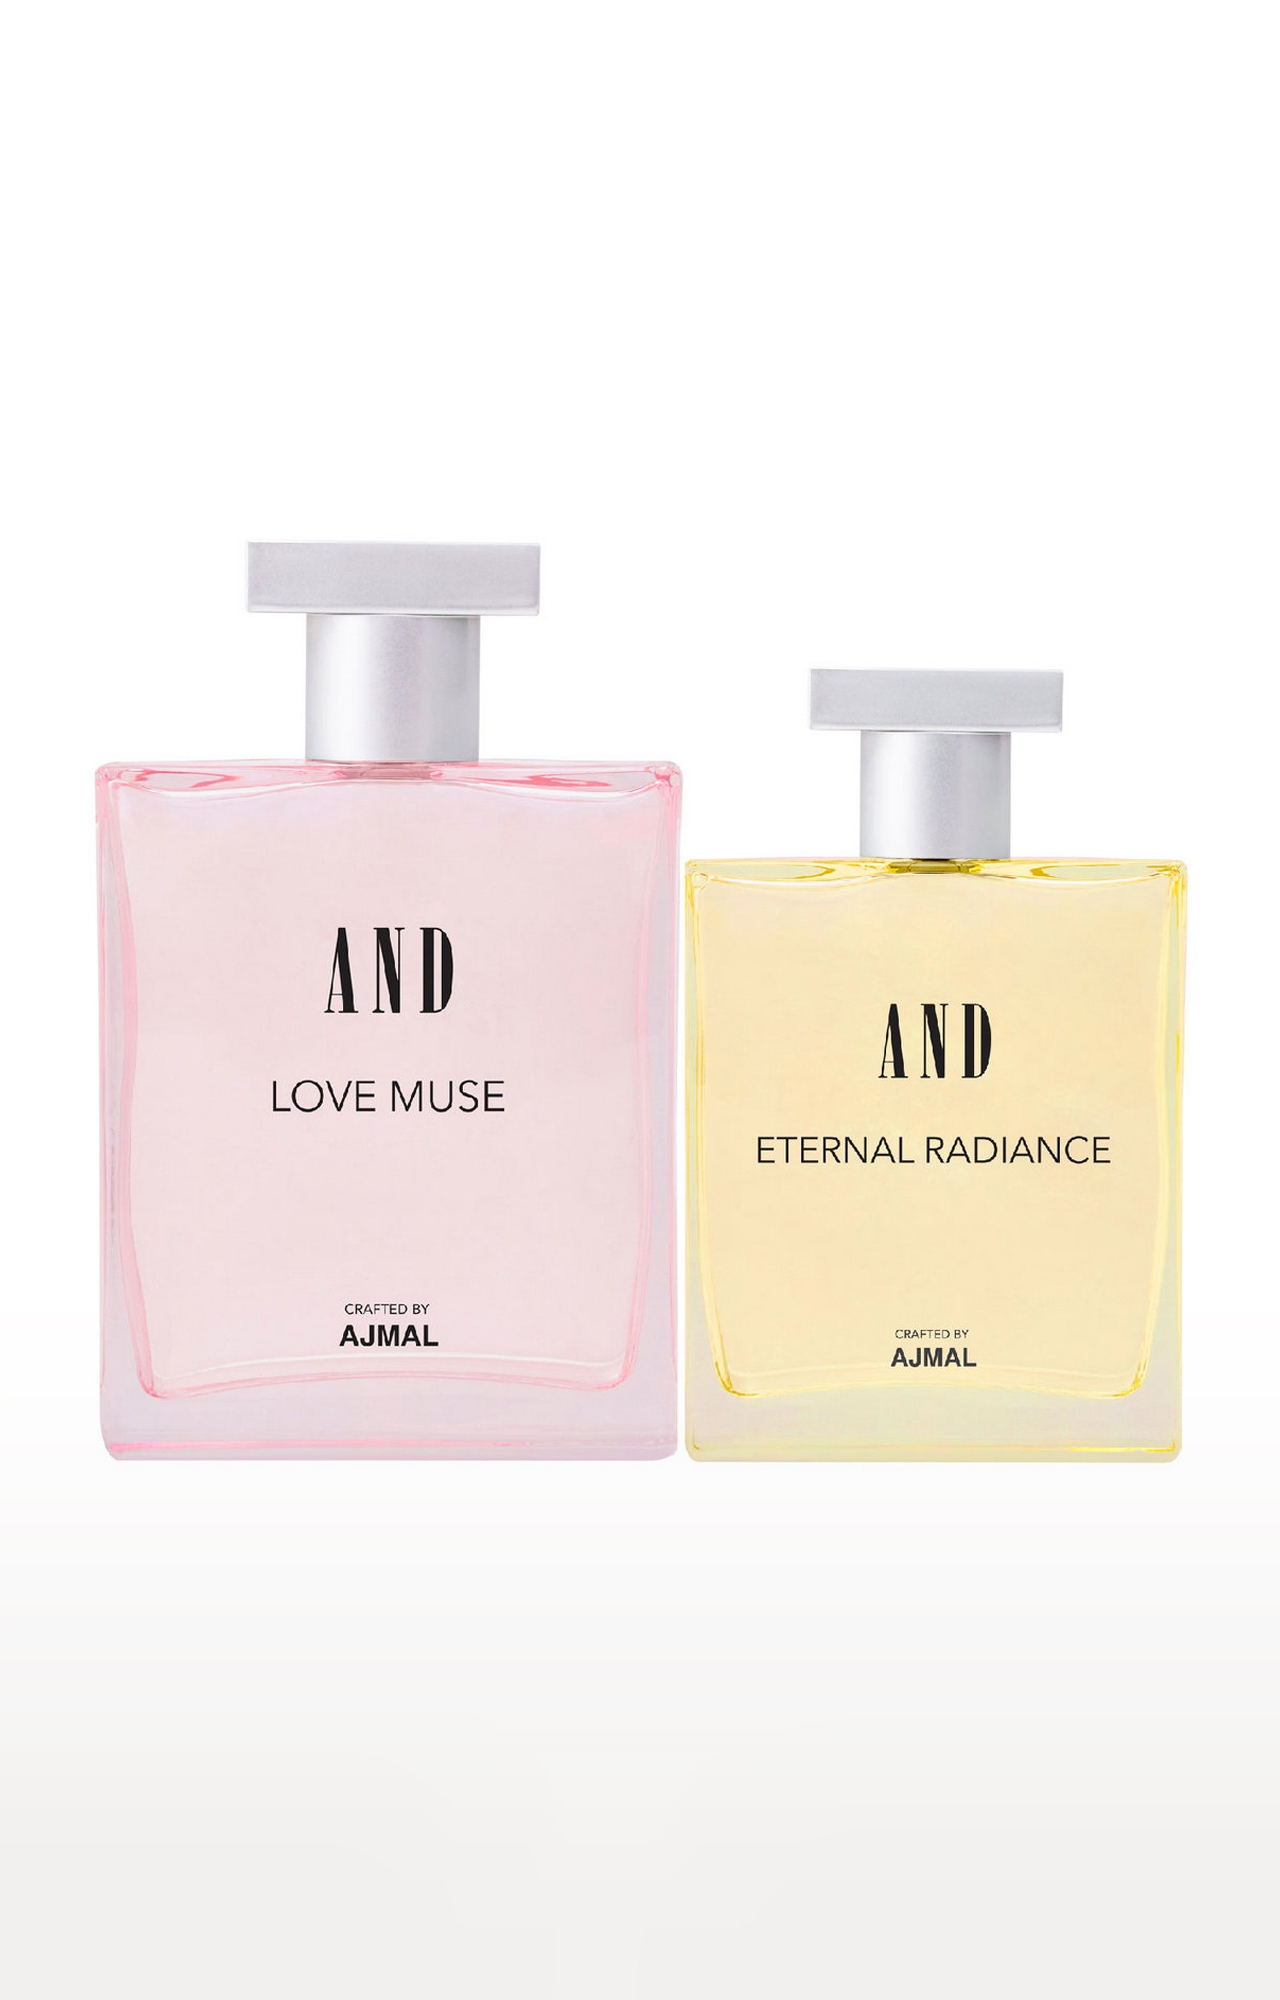 AND Eternal Radiance 100ML & Love Muse 50ML Pack of 2 Eau De Parfum for Women Crafted by Ajmal 